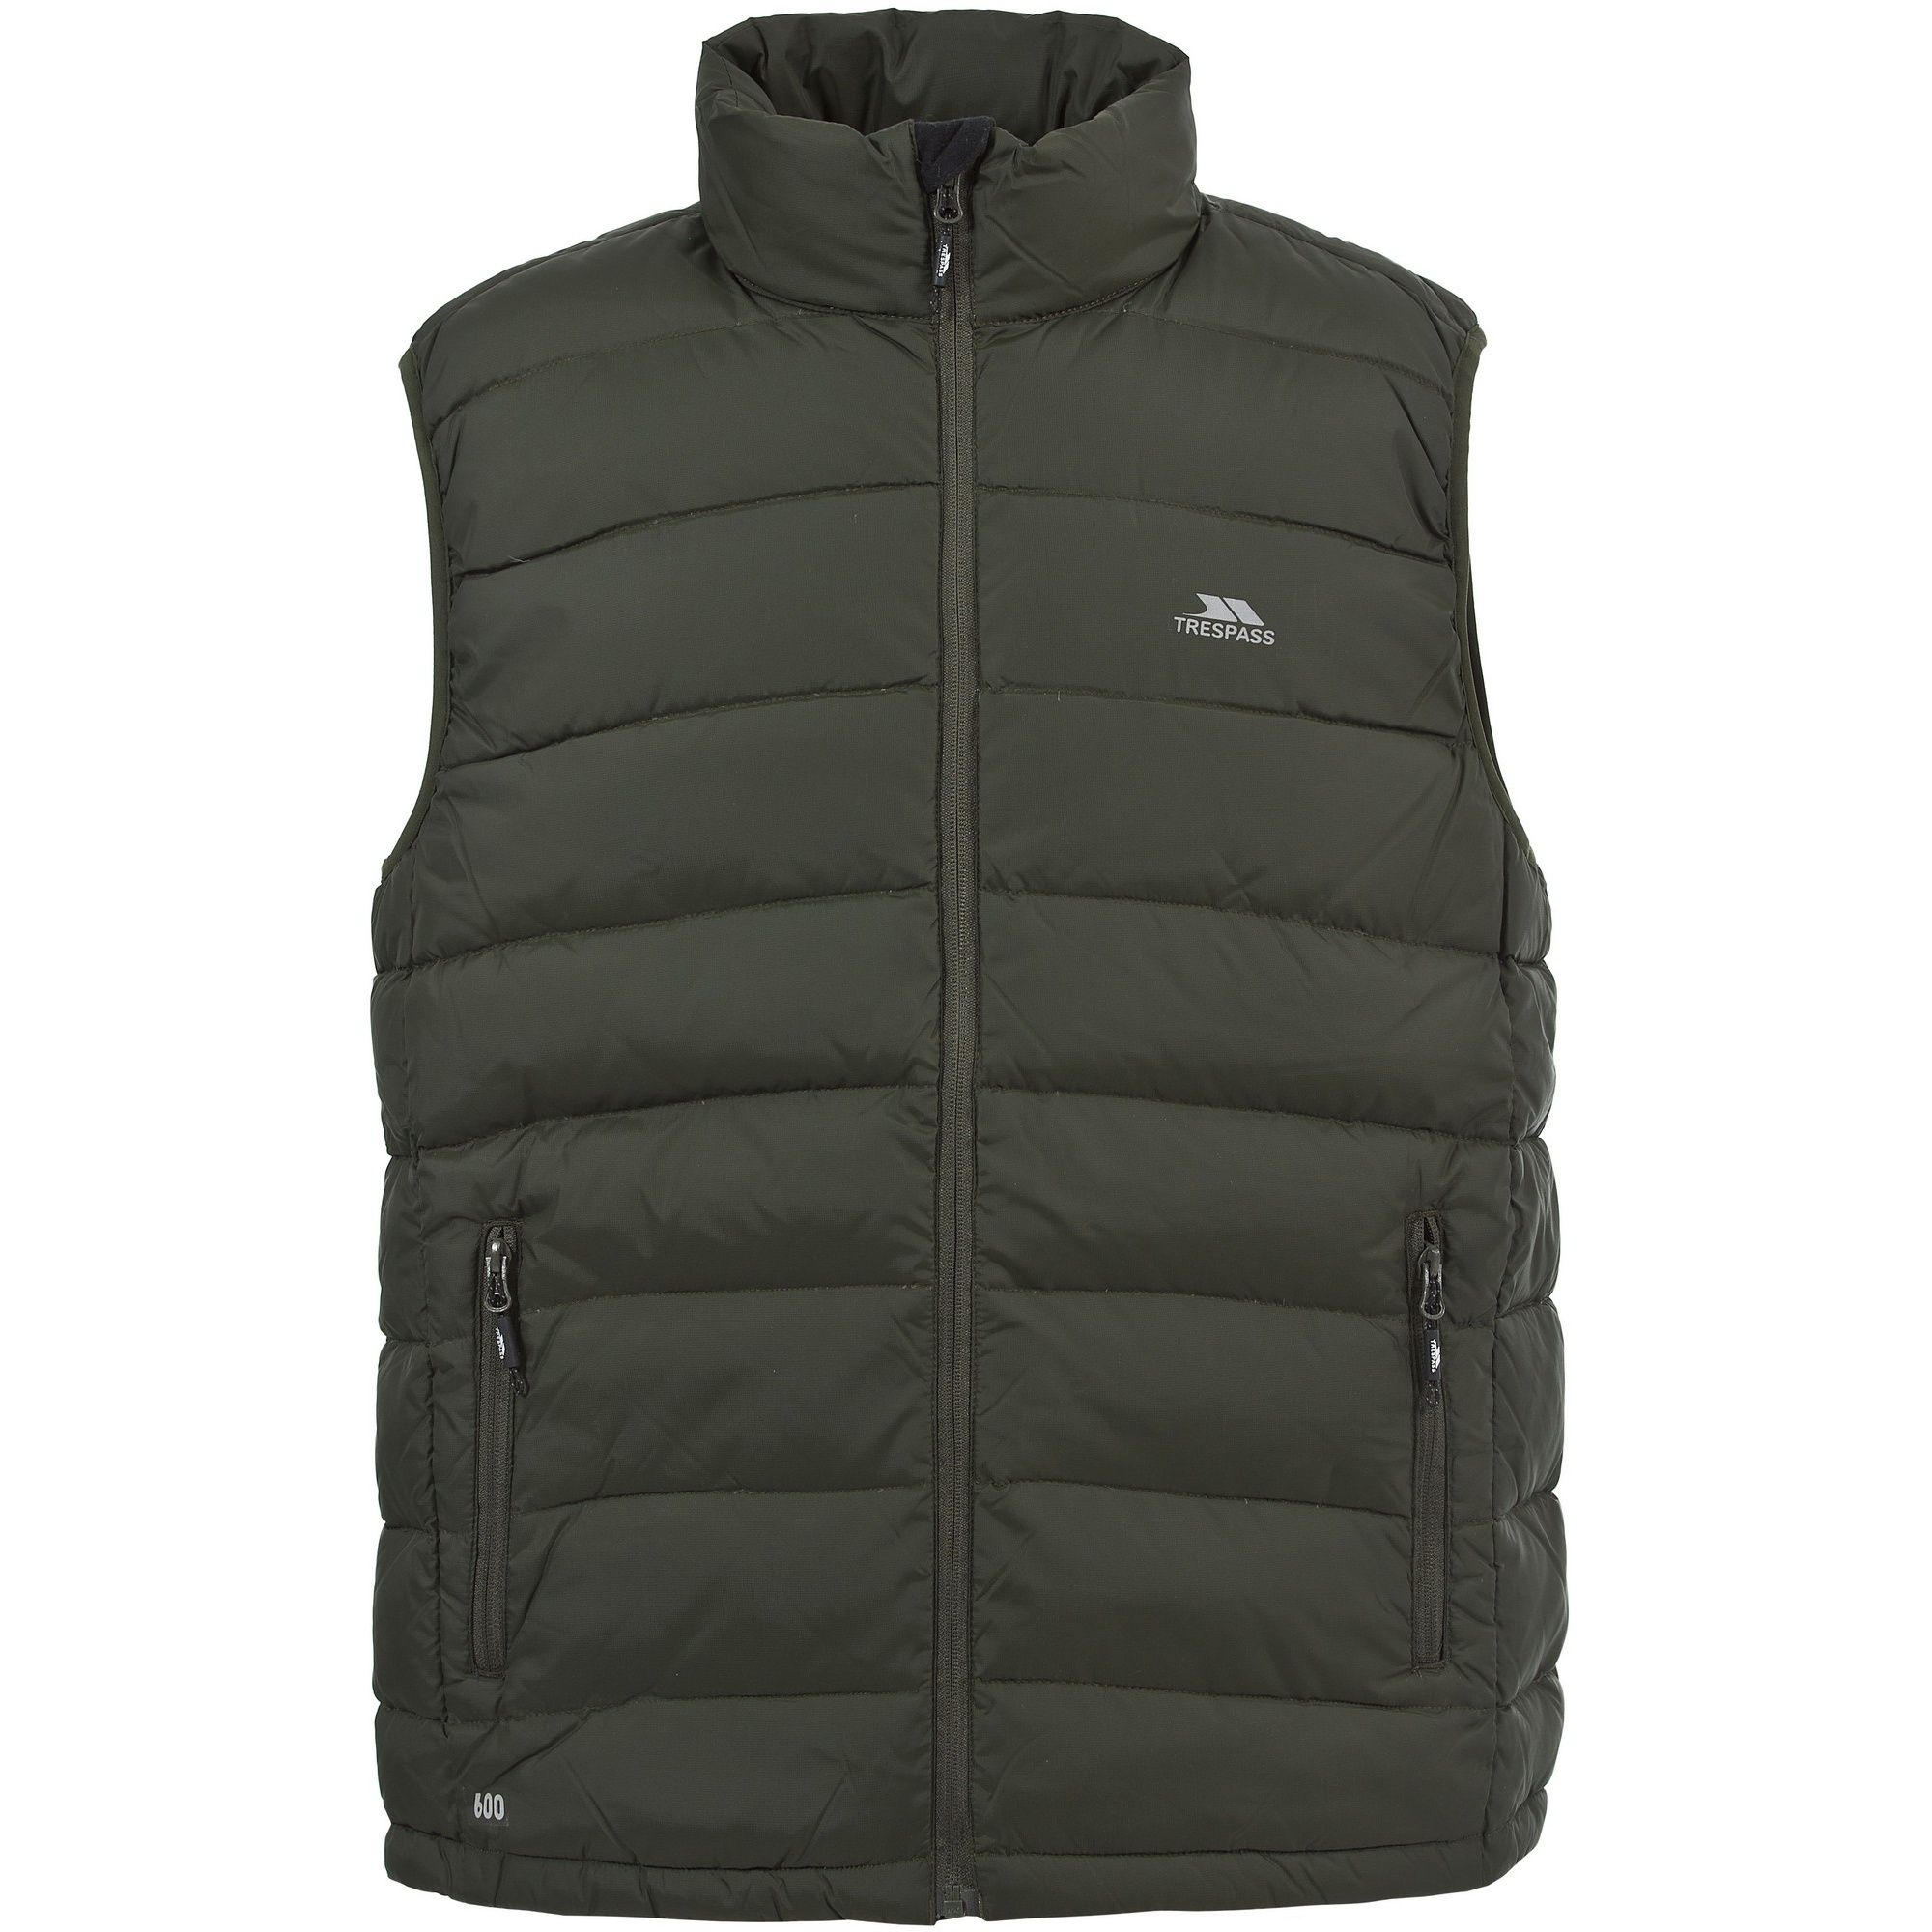 Mens down body warmer. Lower zip pockets. Low profile front zip. Matching binding at armhole. 80% Down, 20% Feather. Shell 100% Polyamide. Lining: 100% Polyamide Downproof Lining.